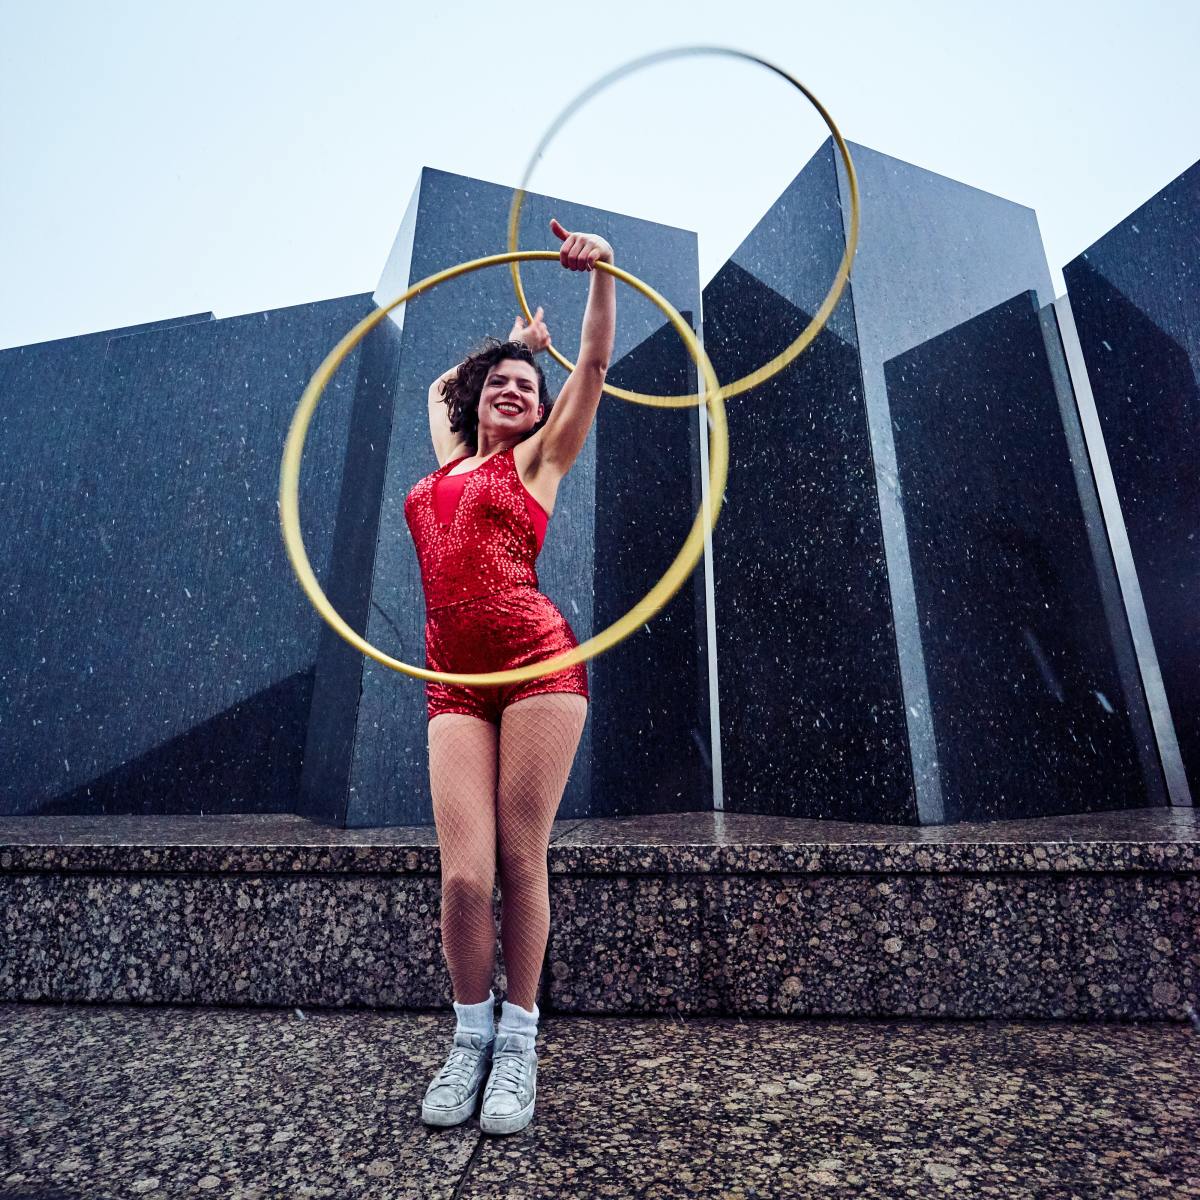 Hula Hoop Advantages and Disadvantages - Is It Worth It?